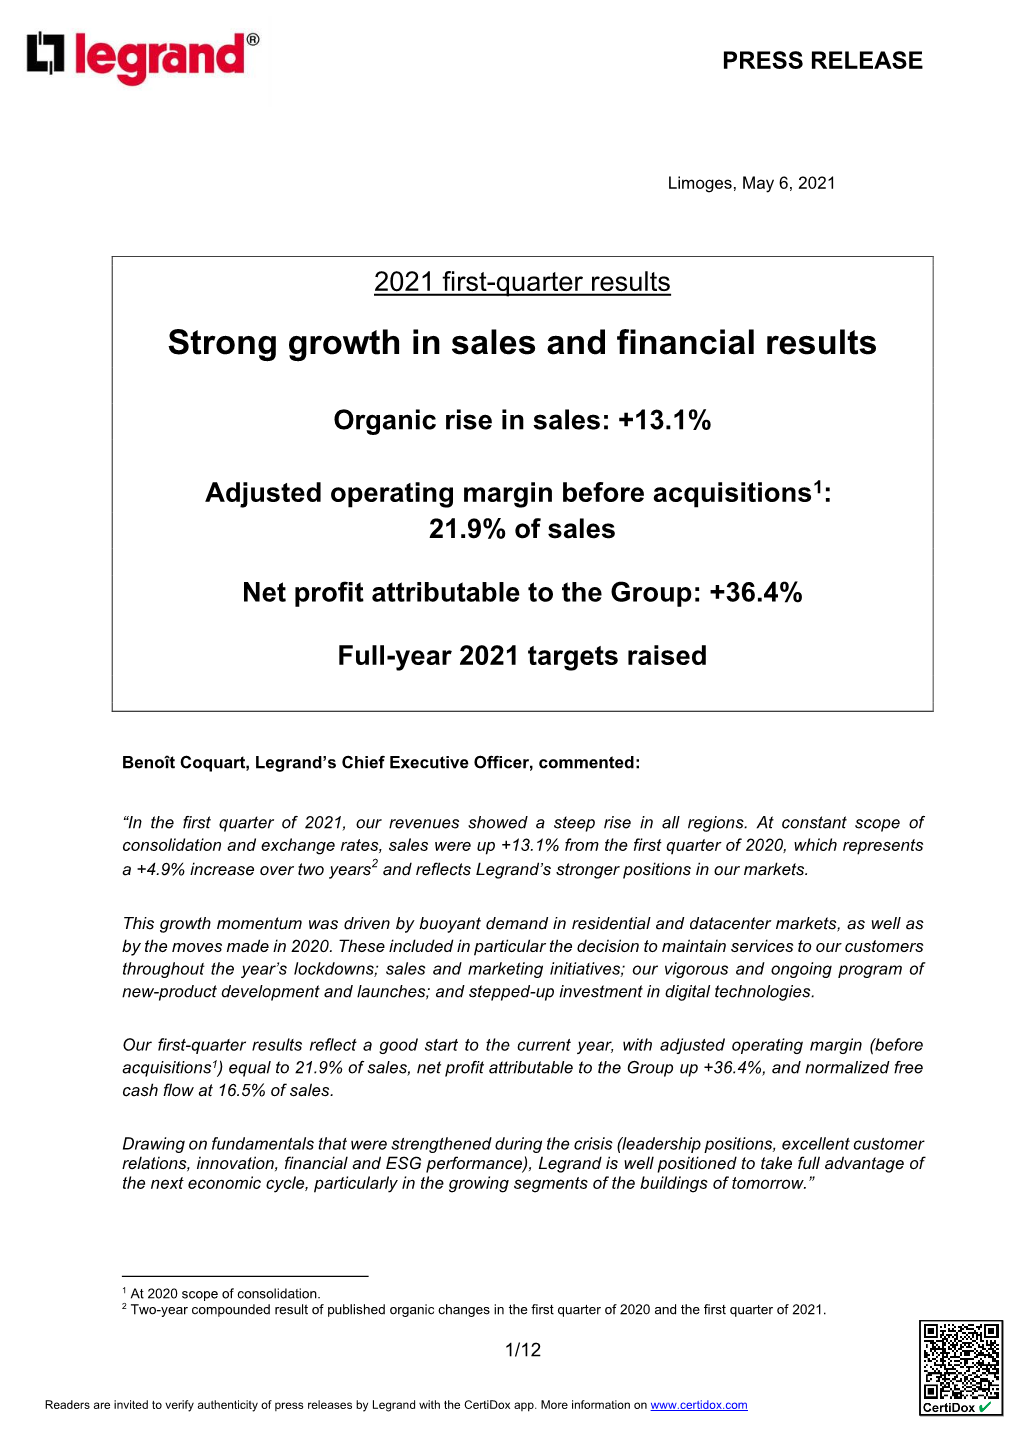 Strong Growth in Sales and Financial Results